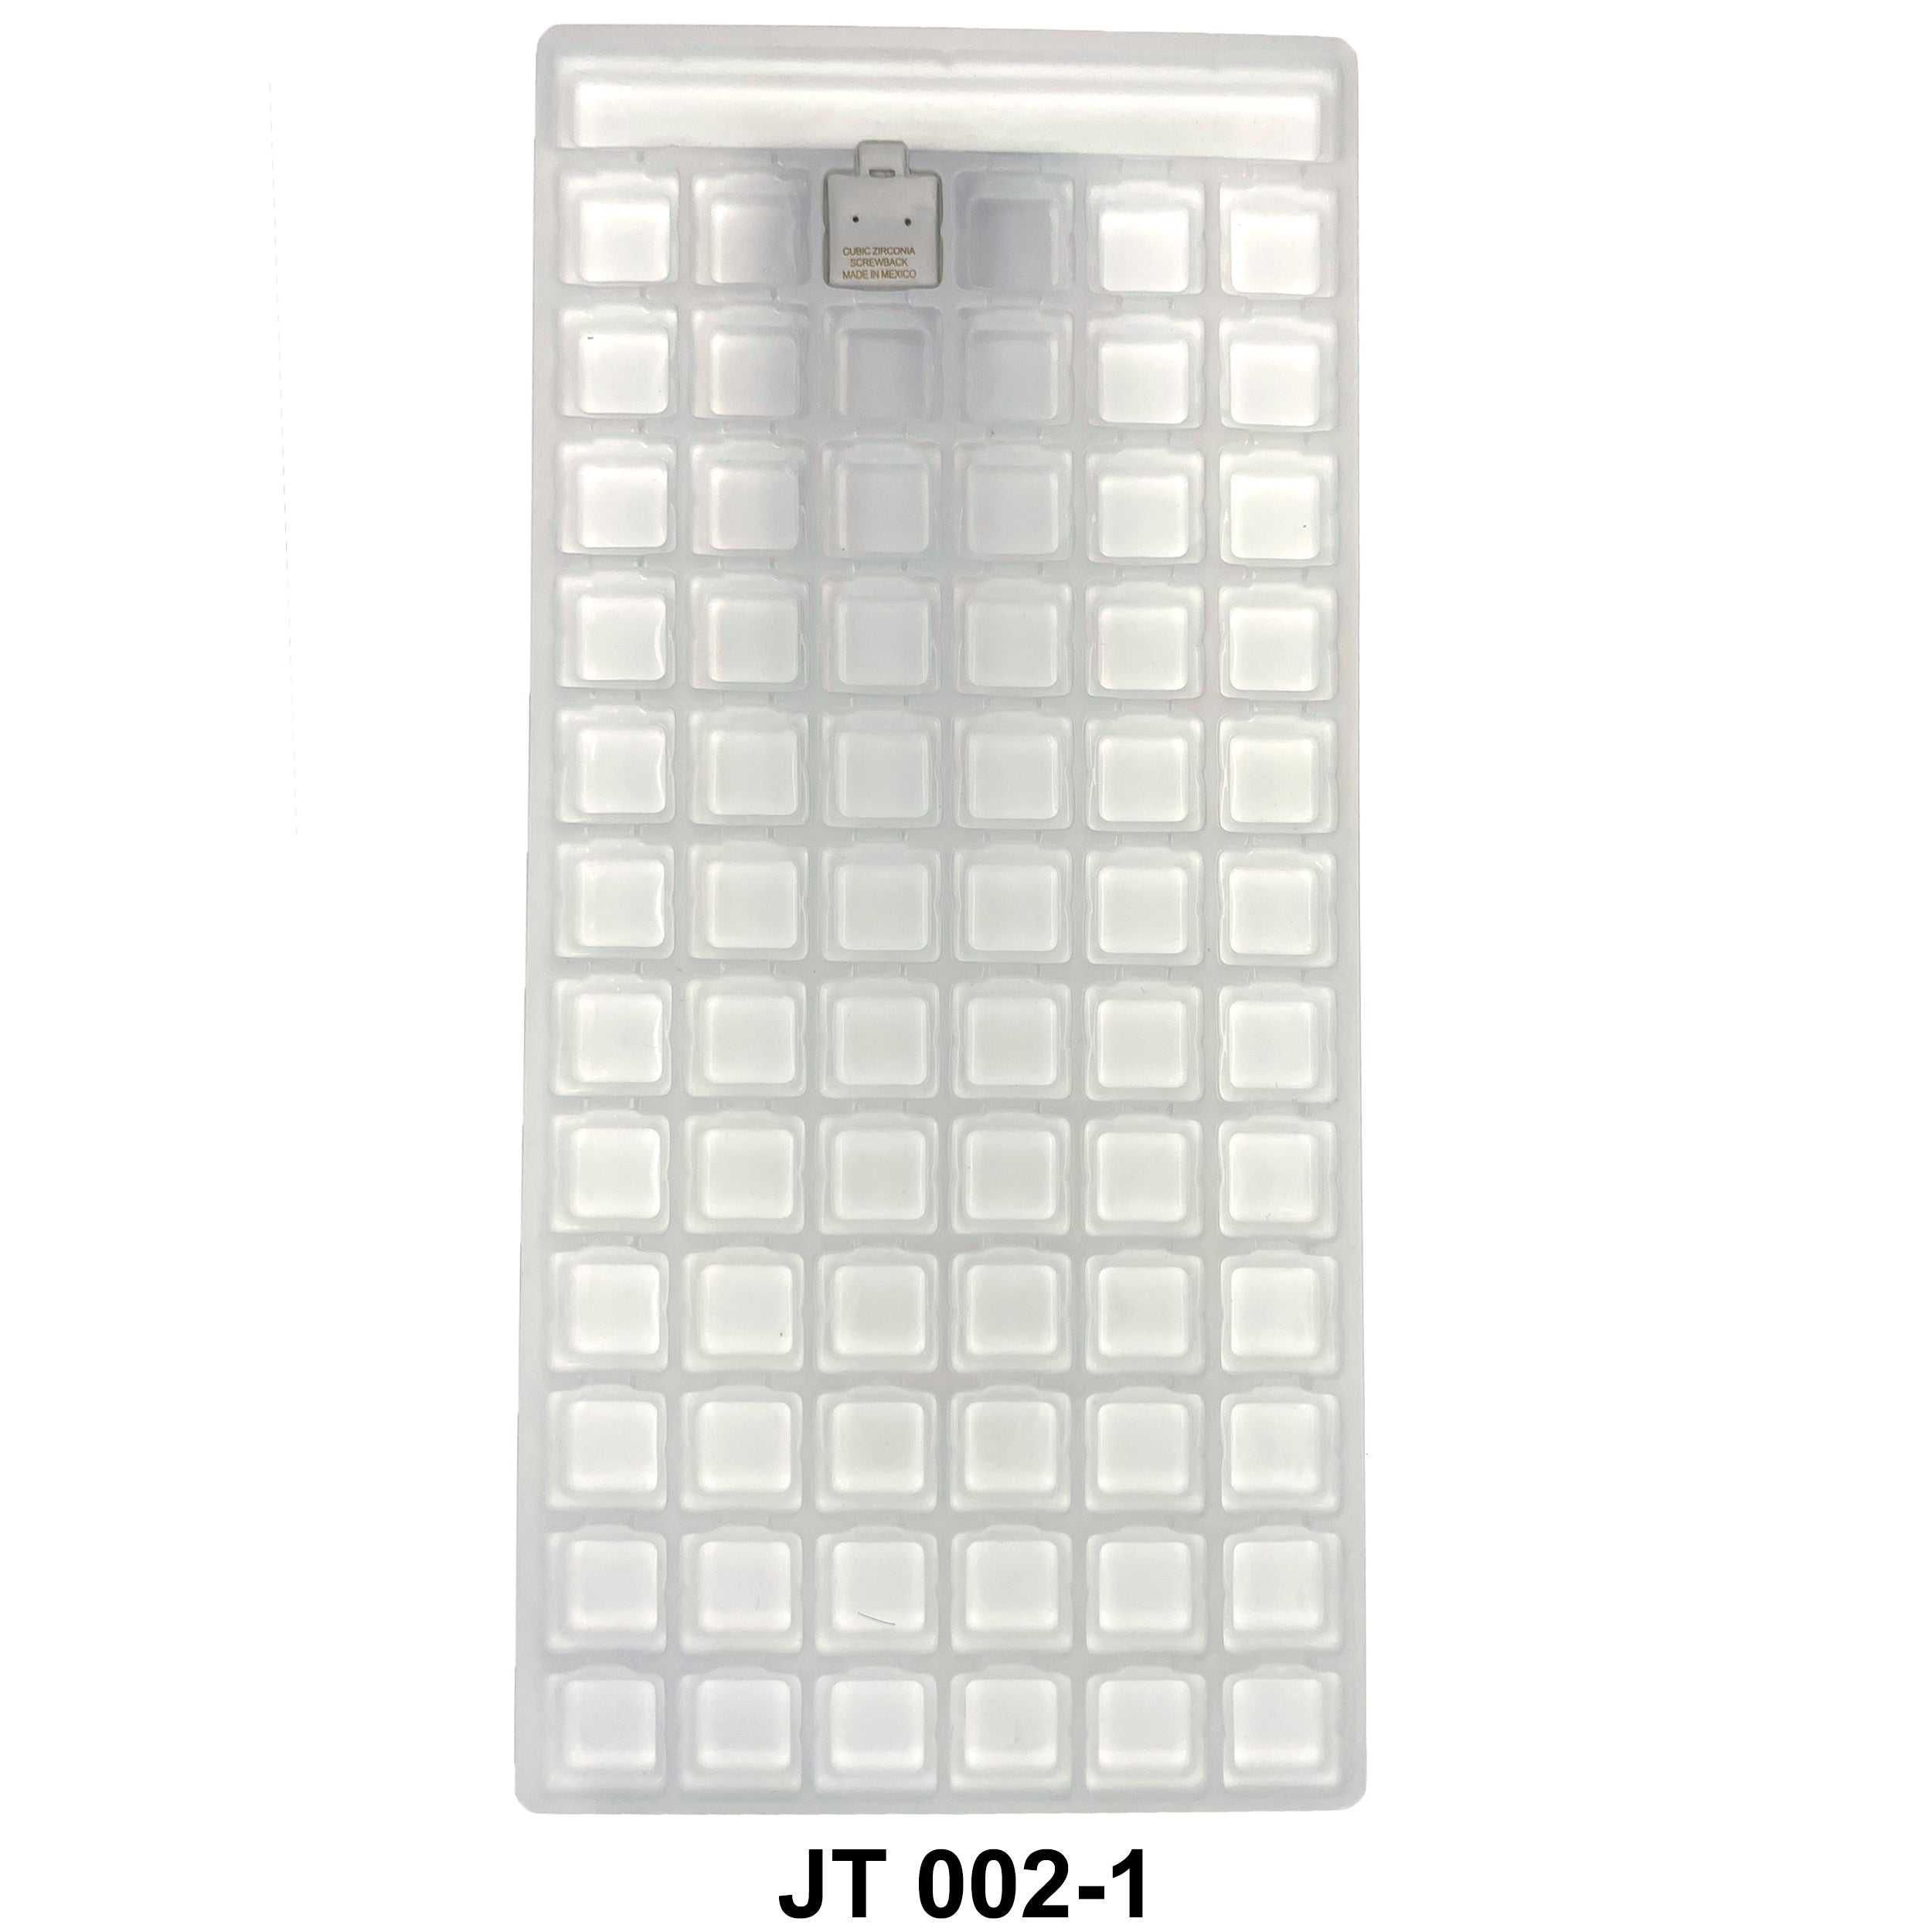 72 Square Cards Tray JT 002-1